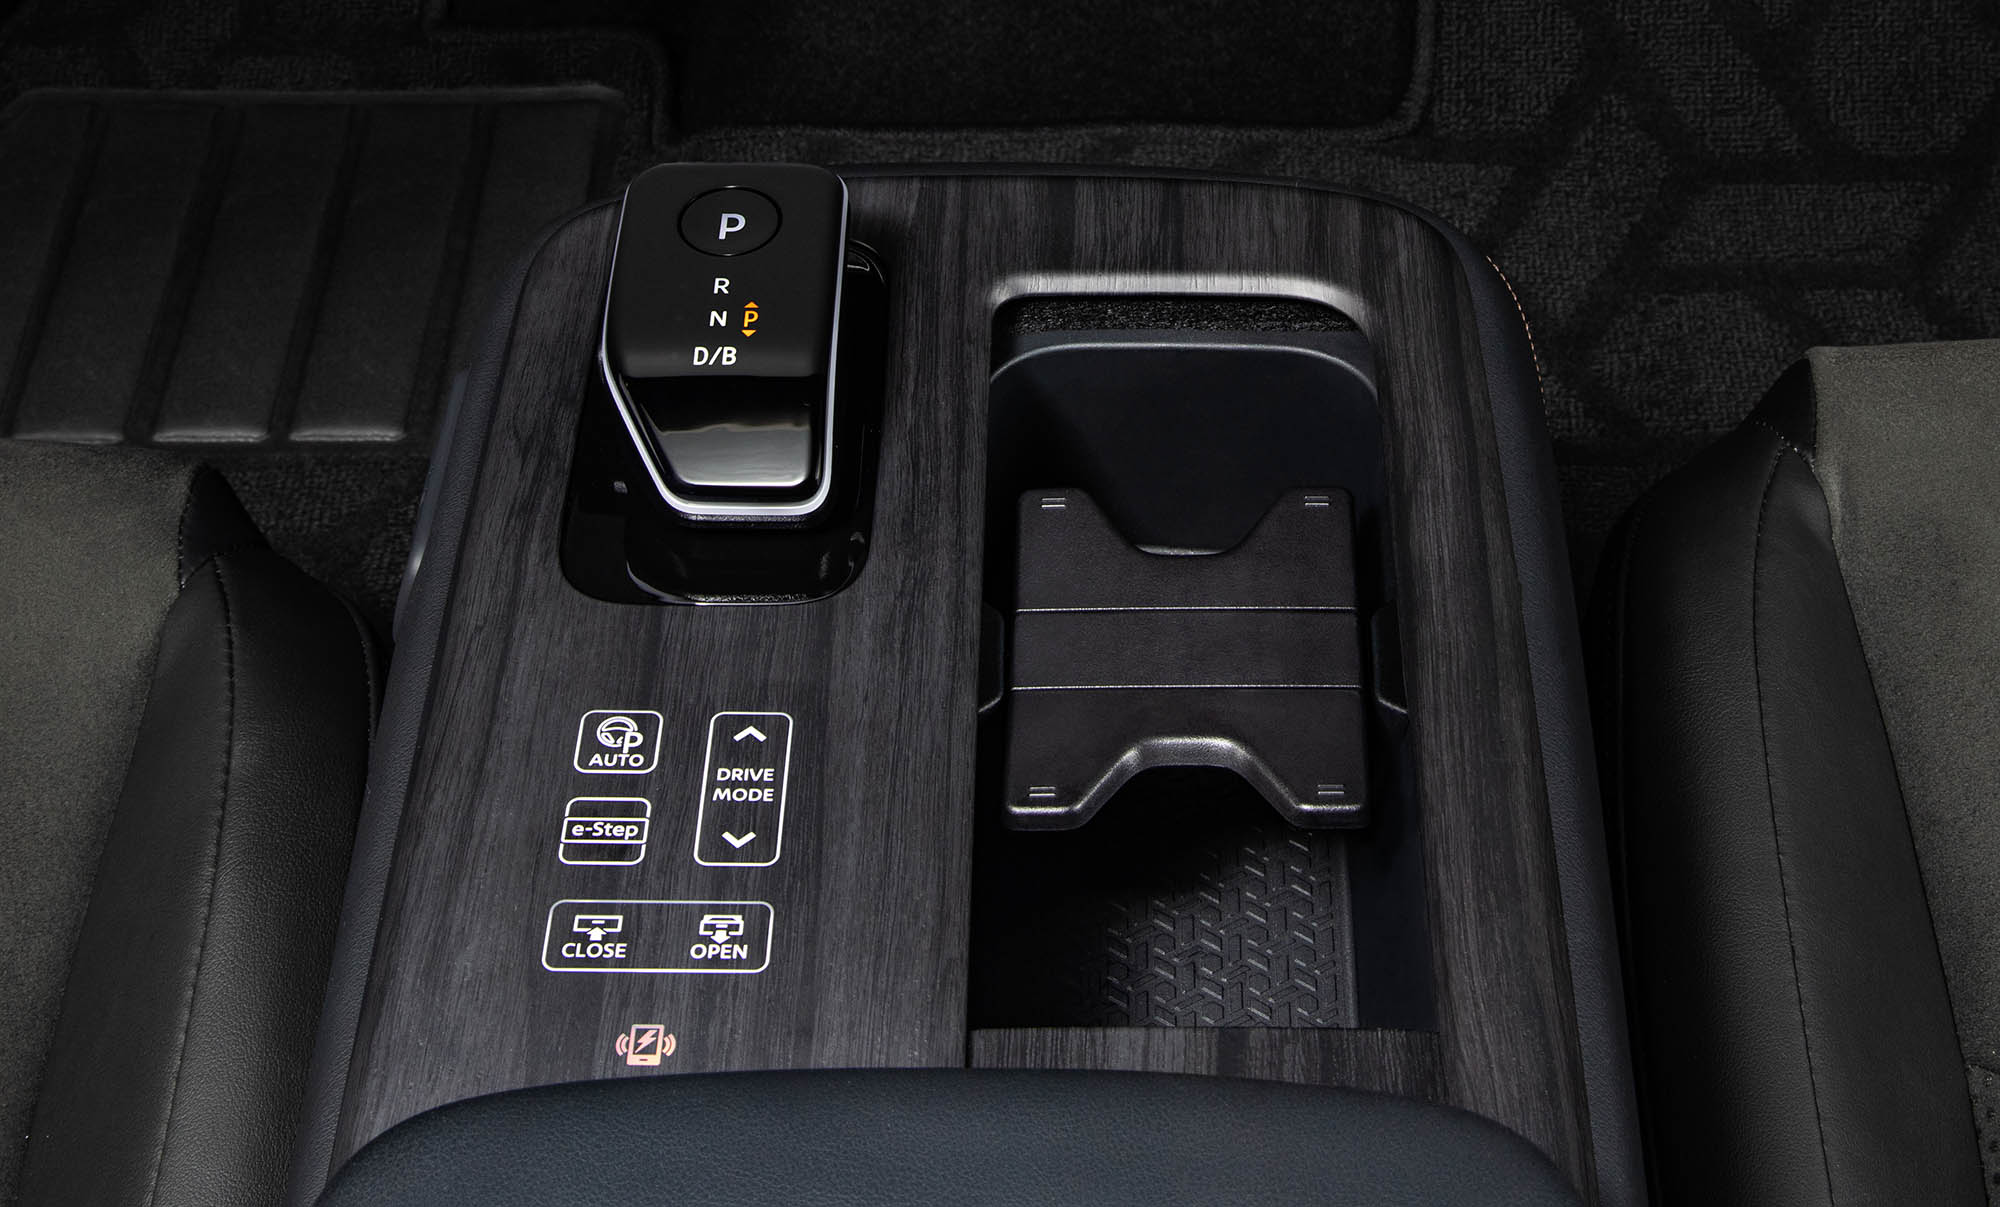 Nissan Ariya electric vehicle center console, shifter, and drive mode selector.